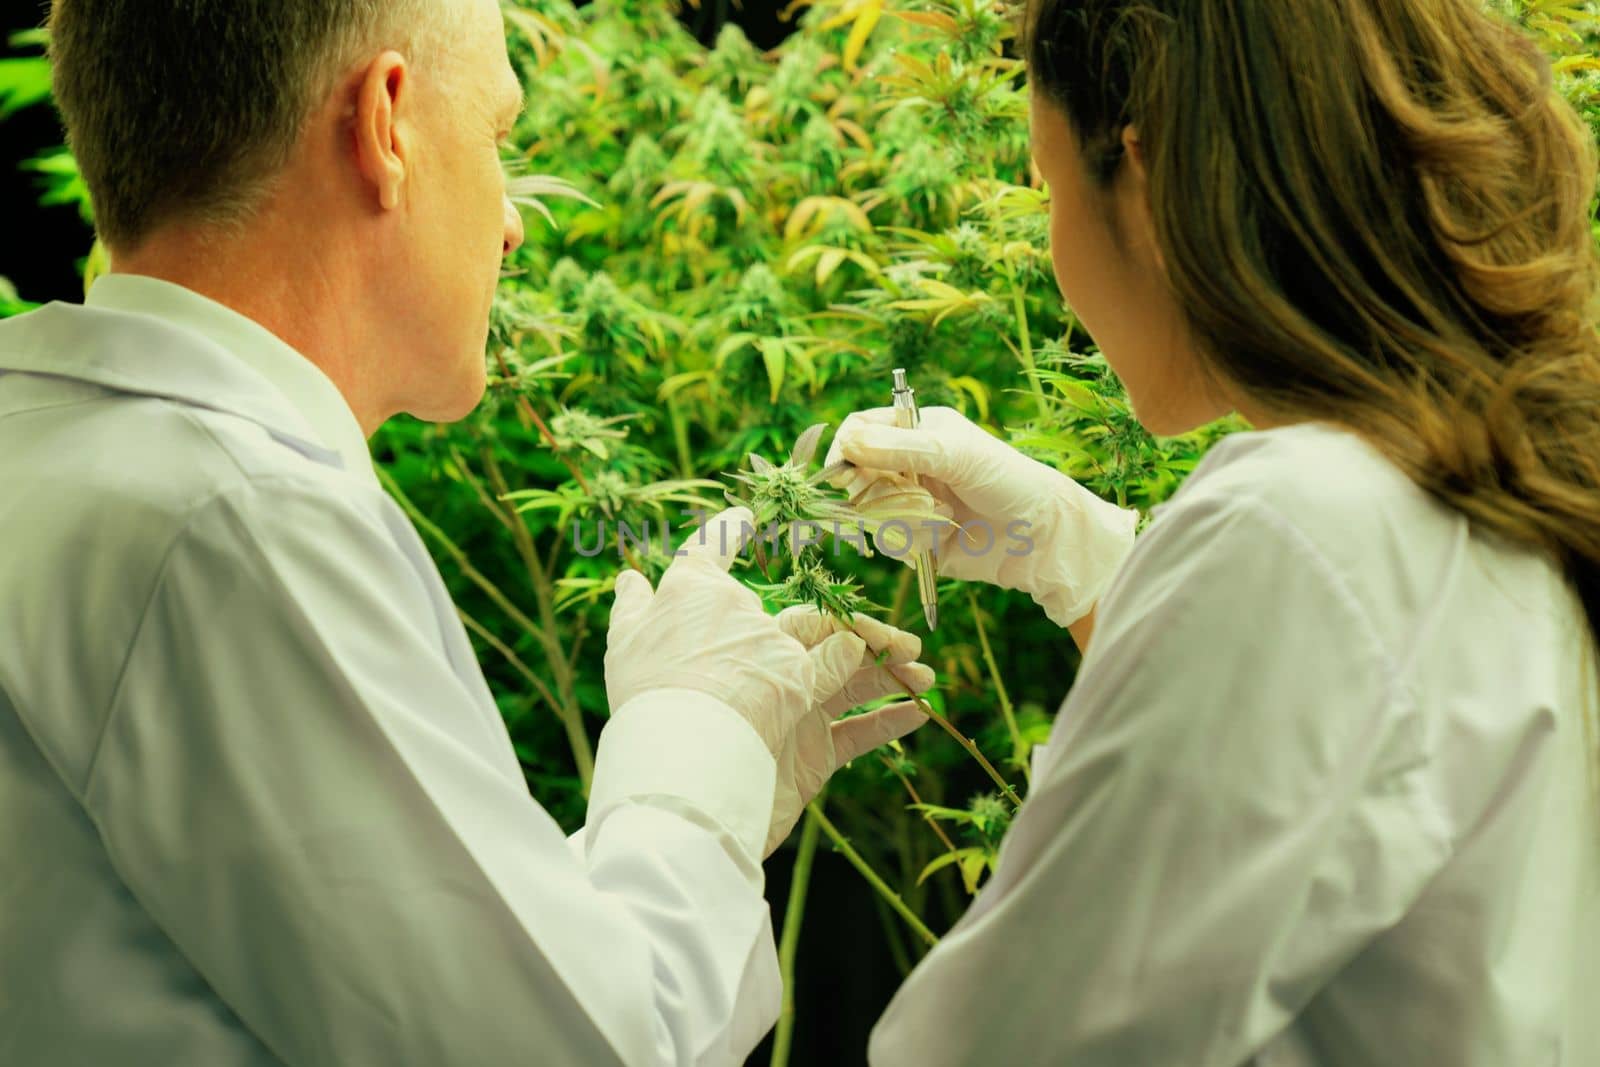 Two scientists discussing about gratifying cannabis plants in a curative indoor cannabis greenhouse. Products extracted from cannabis as an alternative medical treatment.